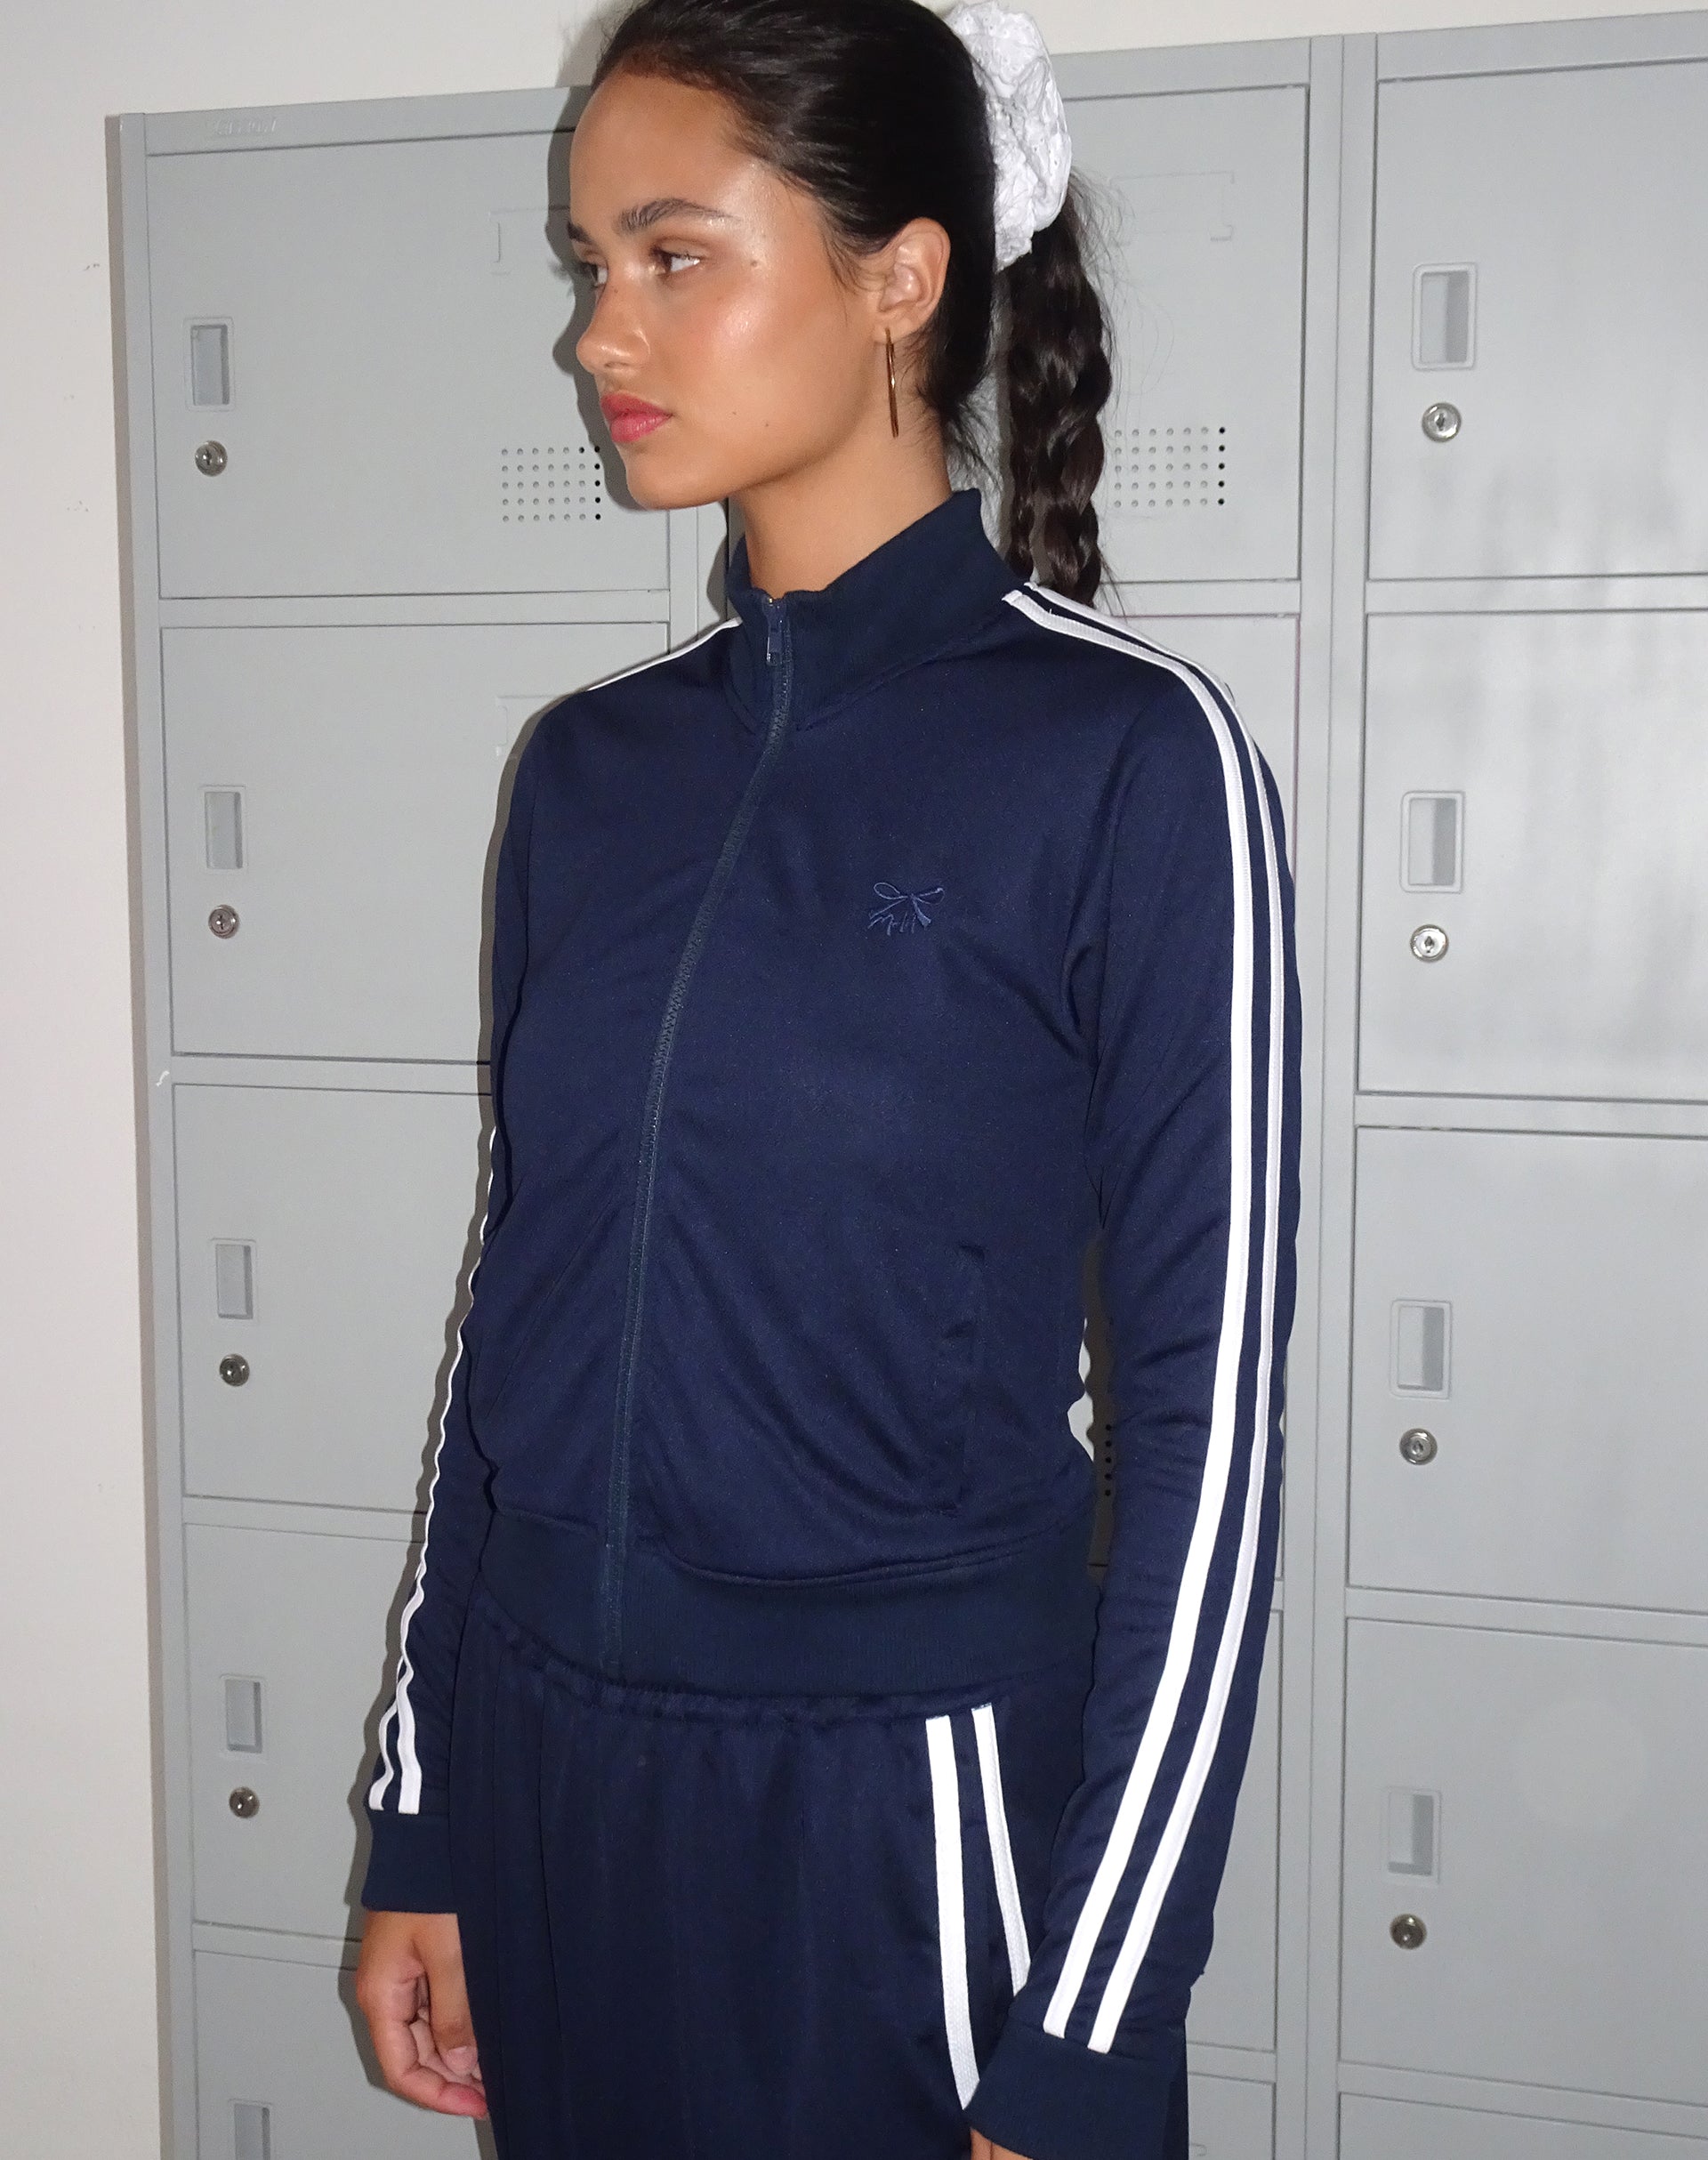 Image of Orion Zip Up Jumper in Navy with White Stripes and M Embroidery